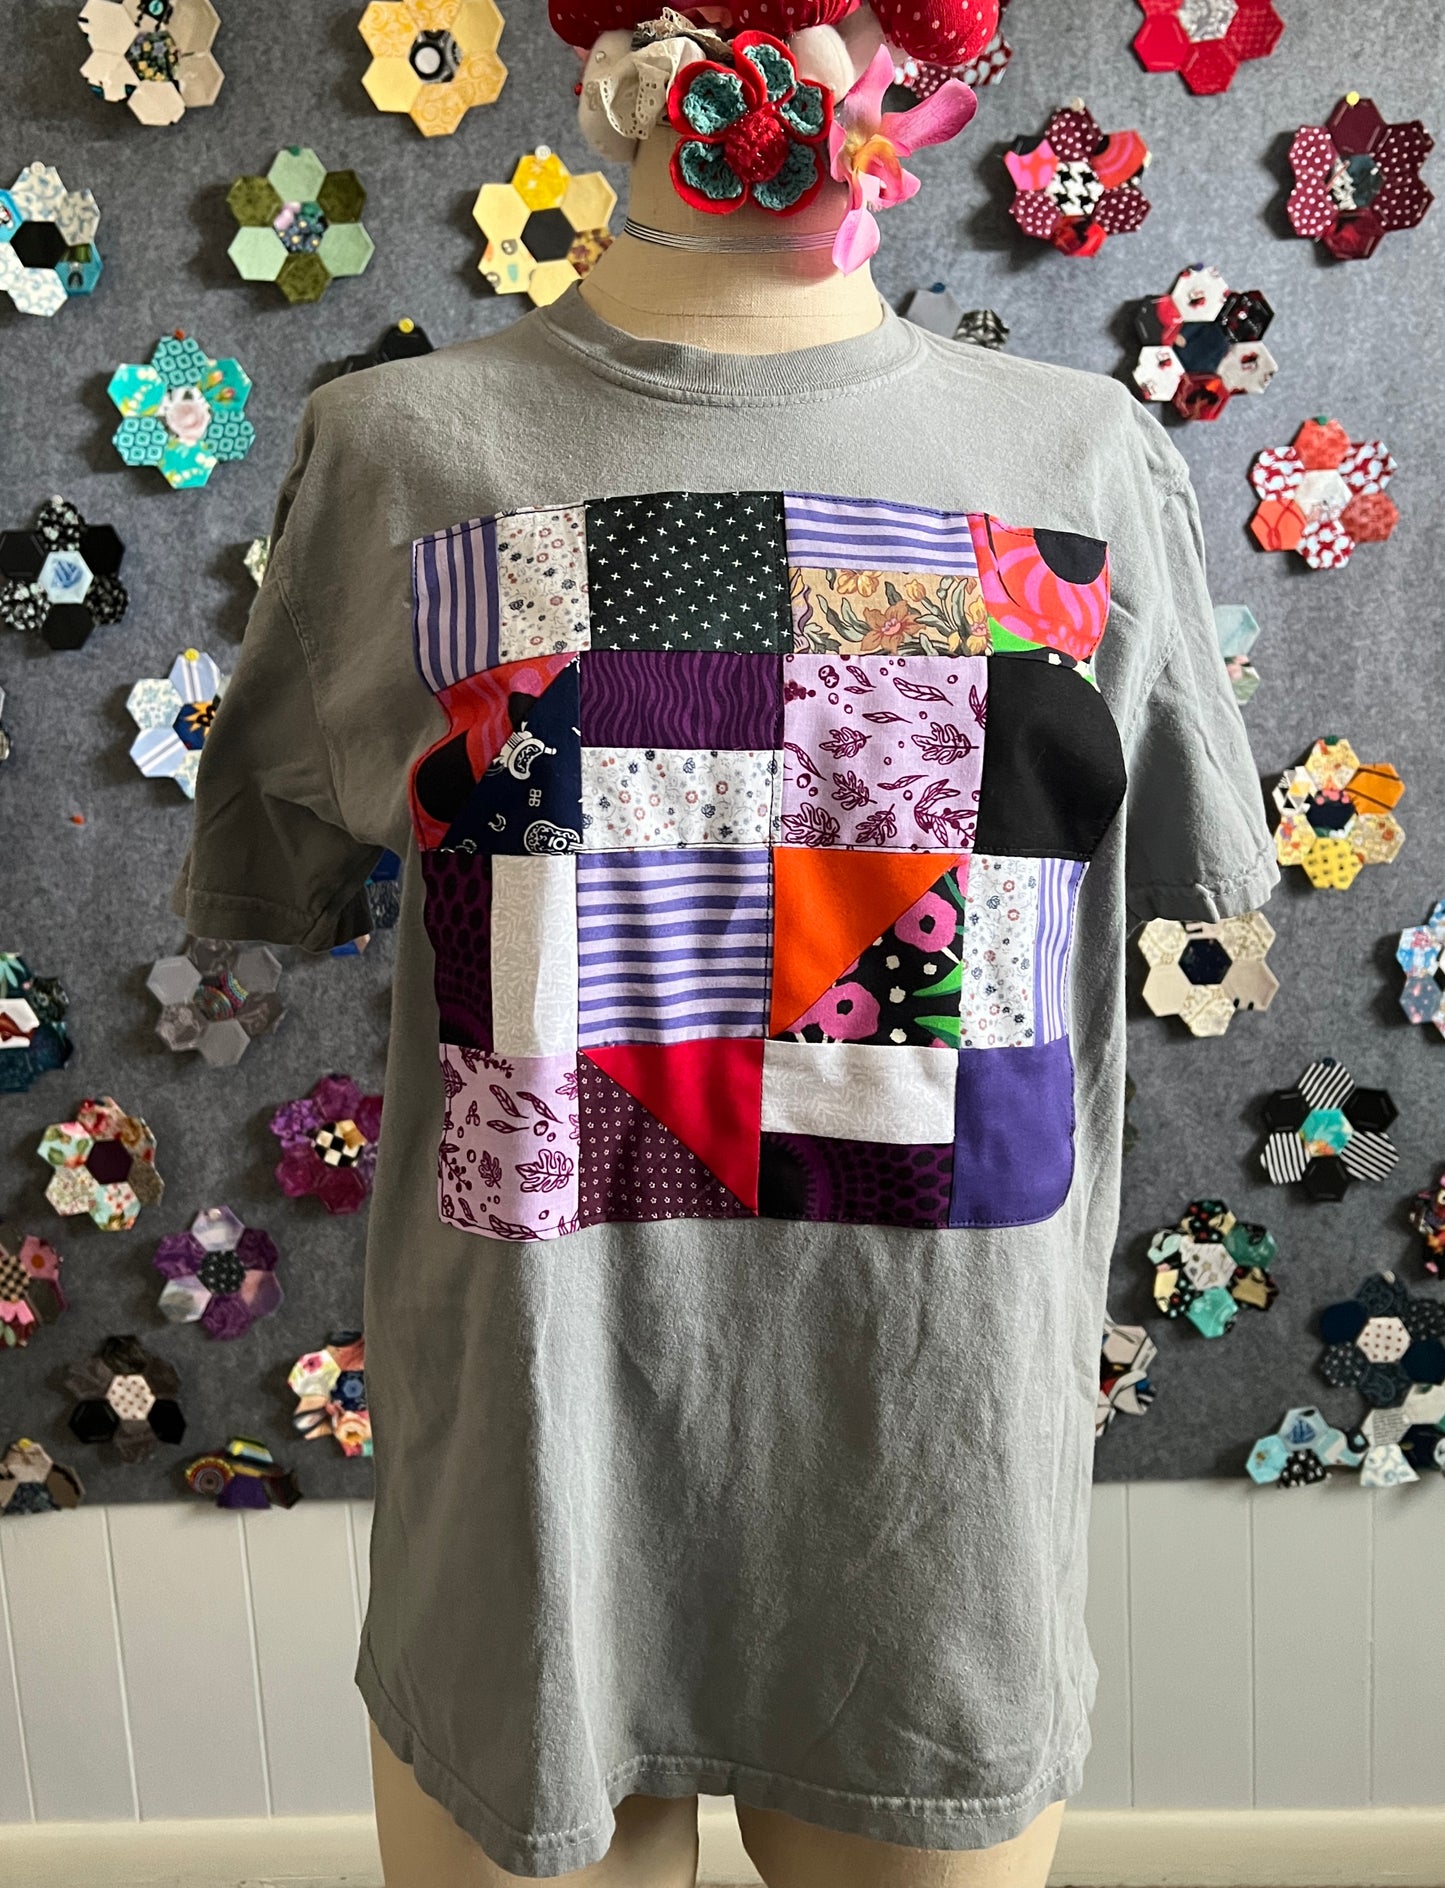 A Panic Clothing - Quilty Crop Tee - Choose Your Style!